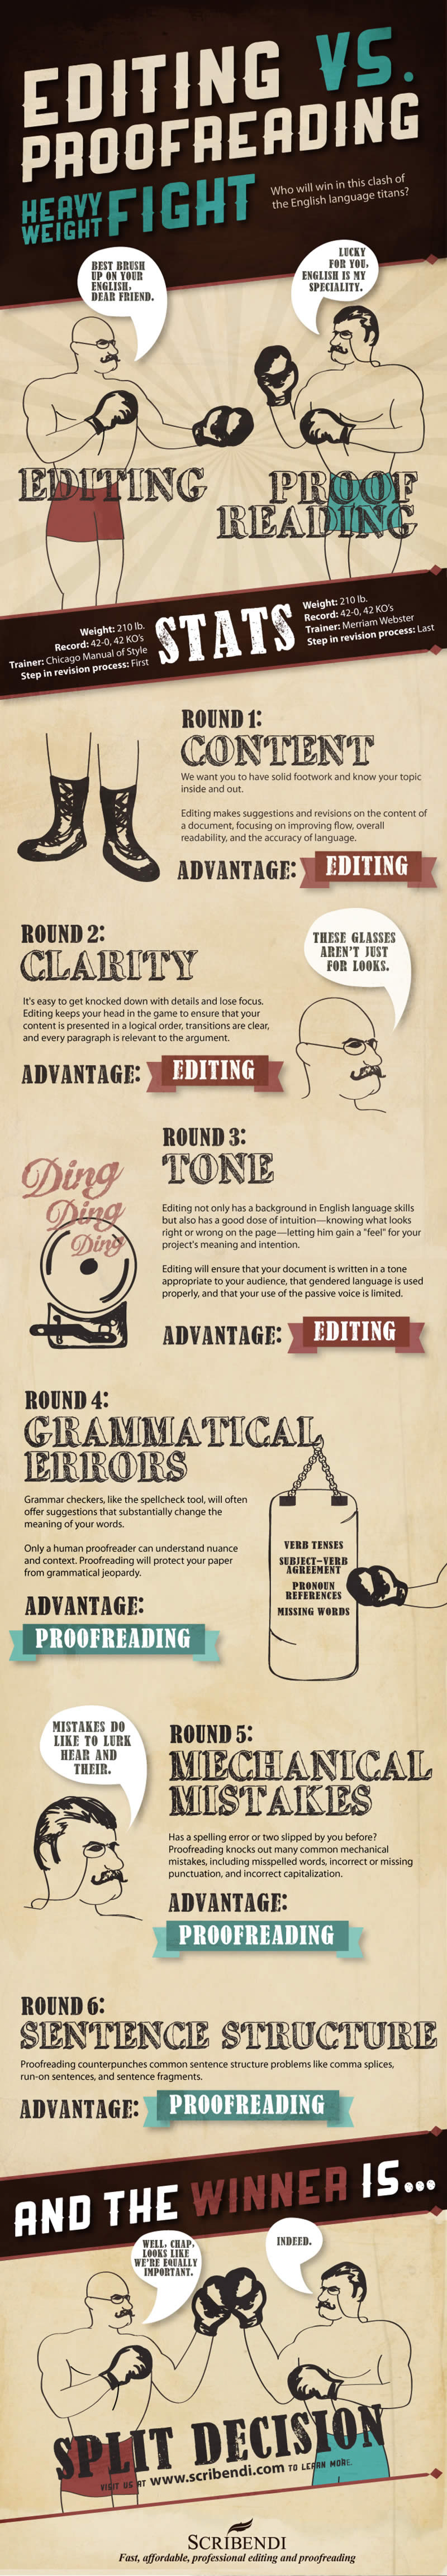 Editing vs. Proofreading: What’s Most Important [Infographic]